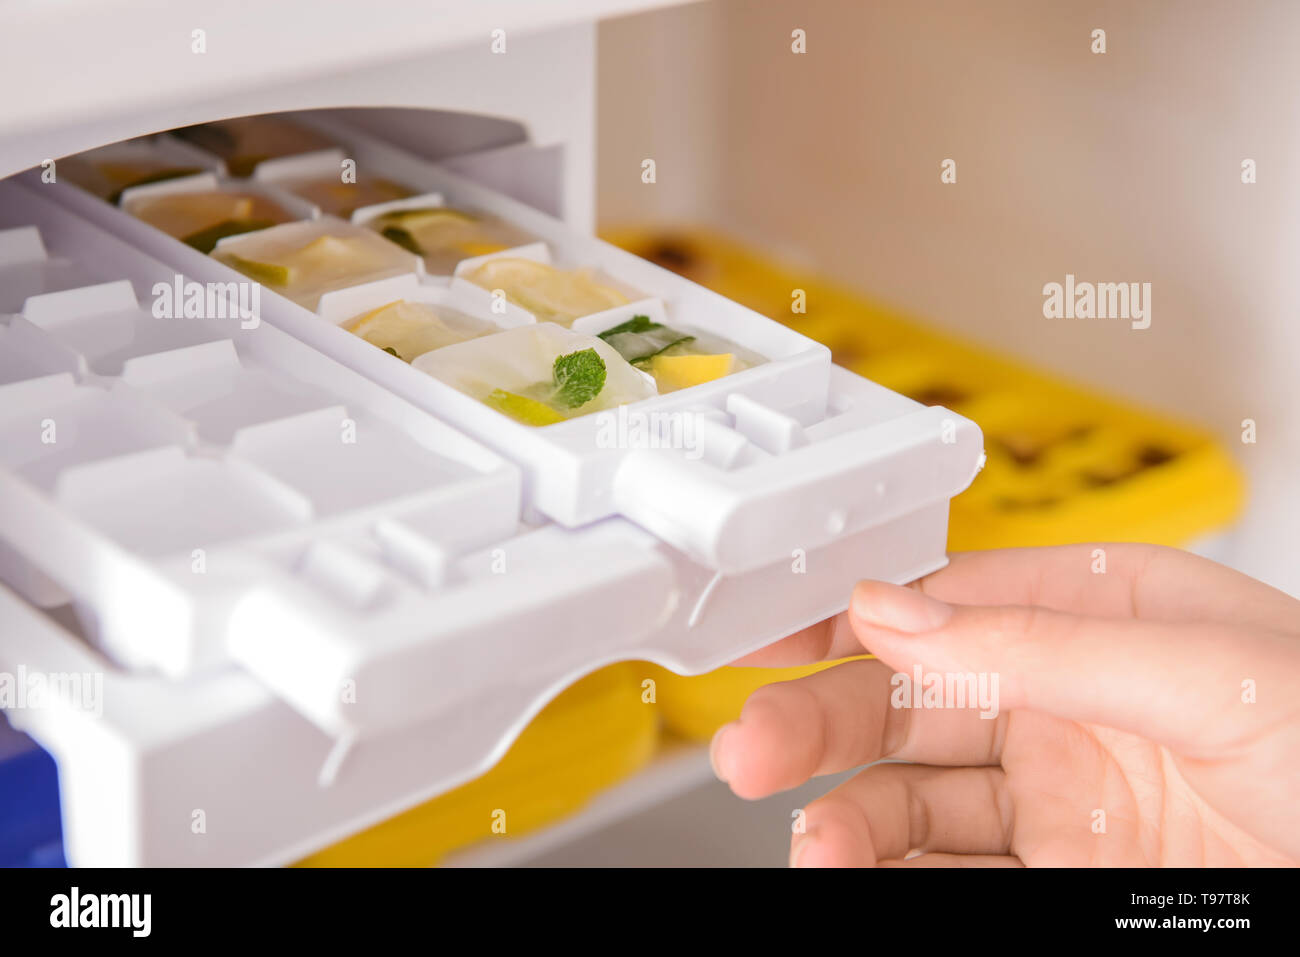 Woman putting tray with citrus fruits frozen in ice cubes into refrigerator Stock Photo